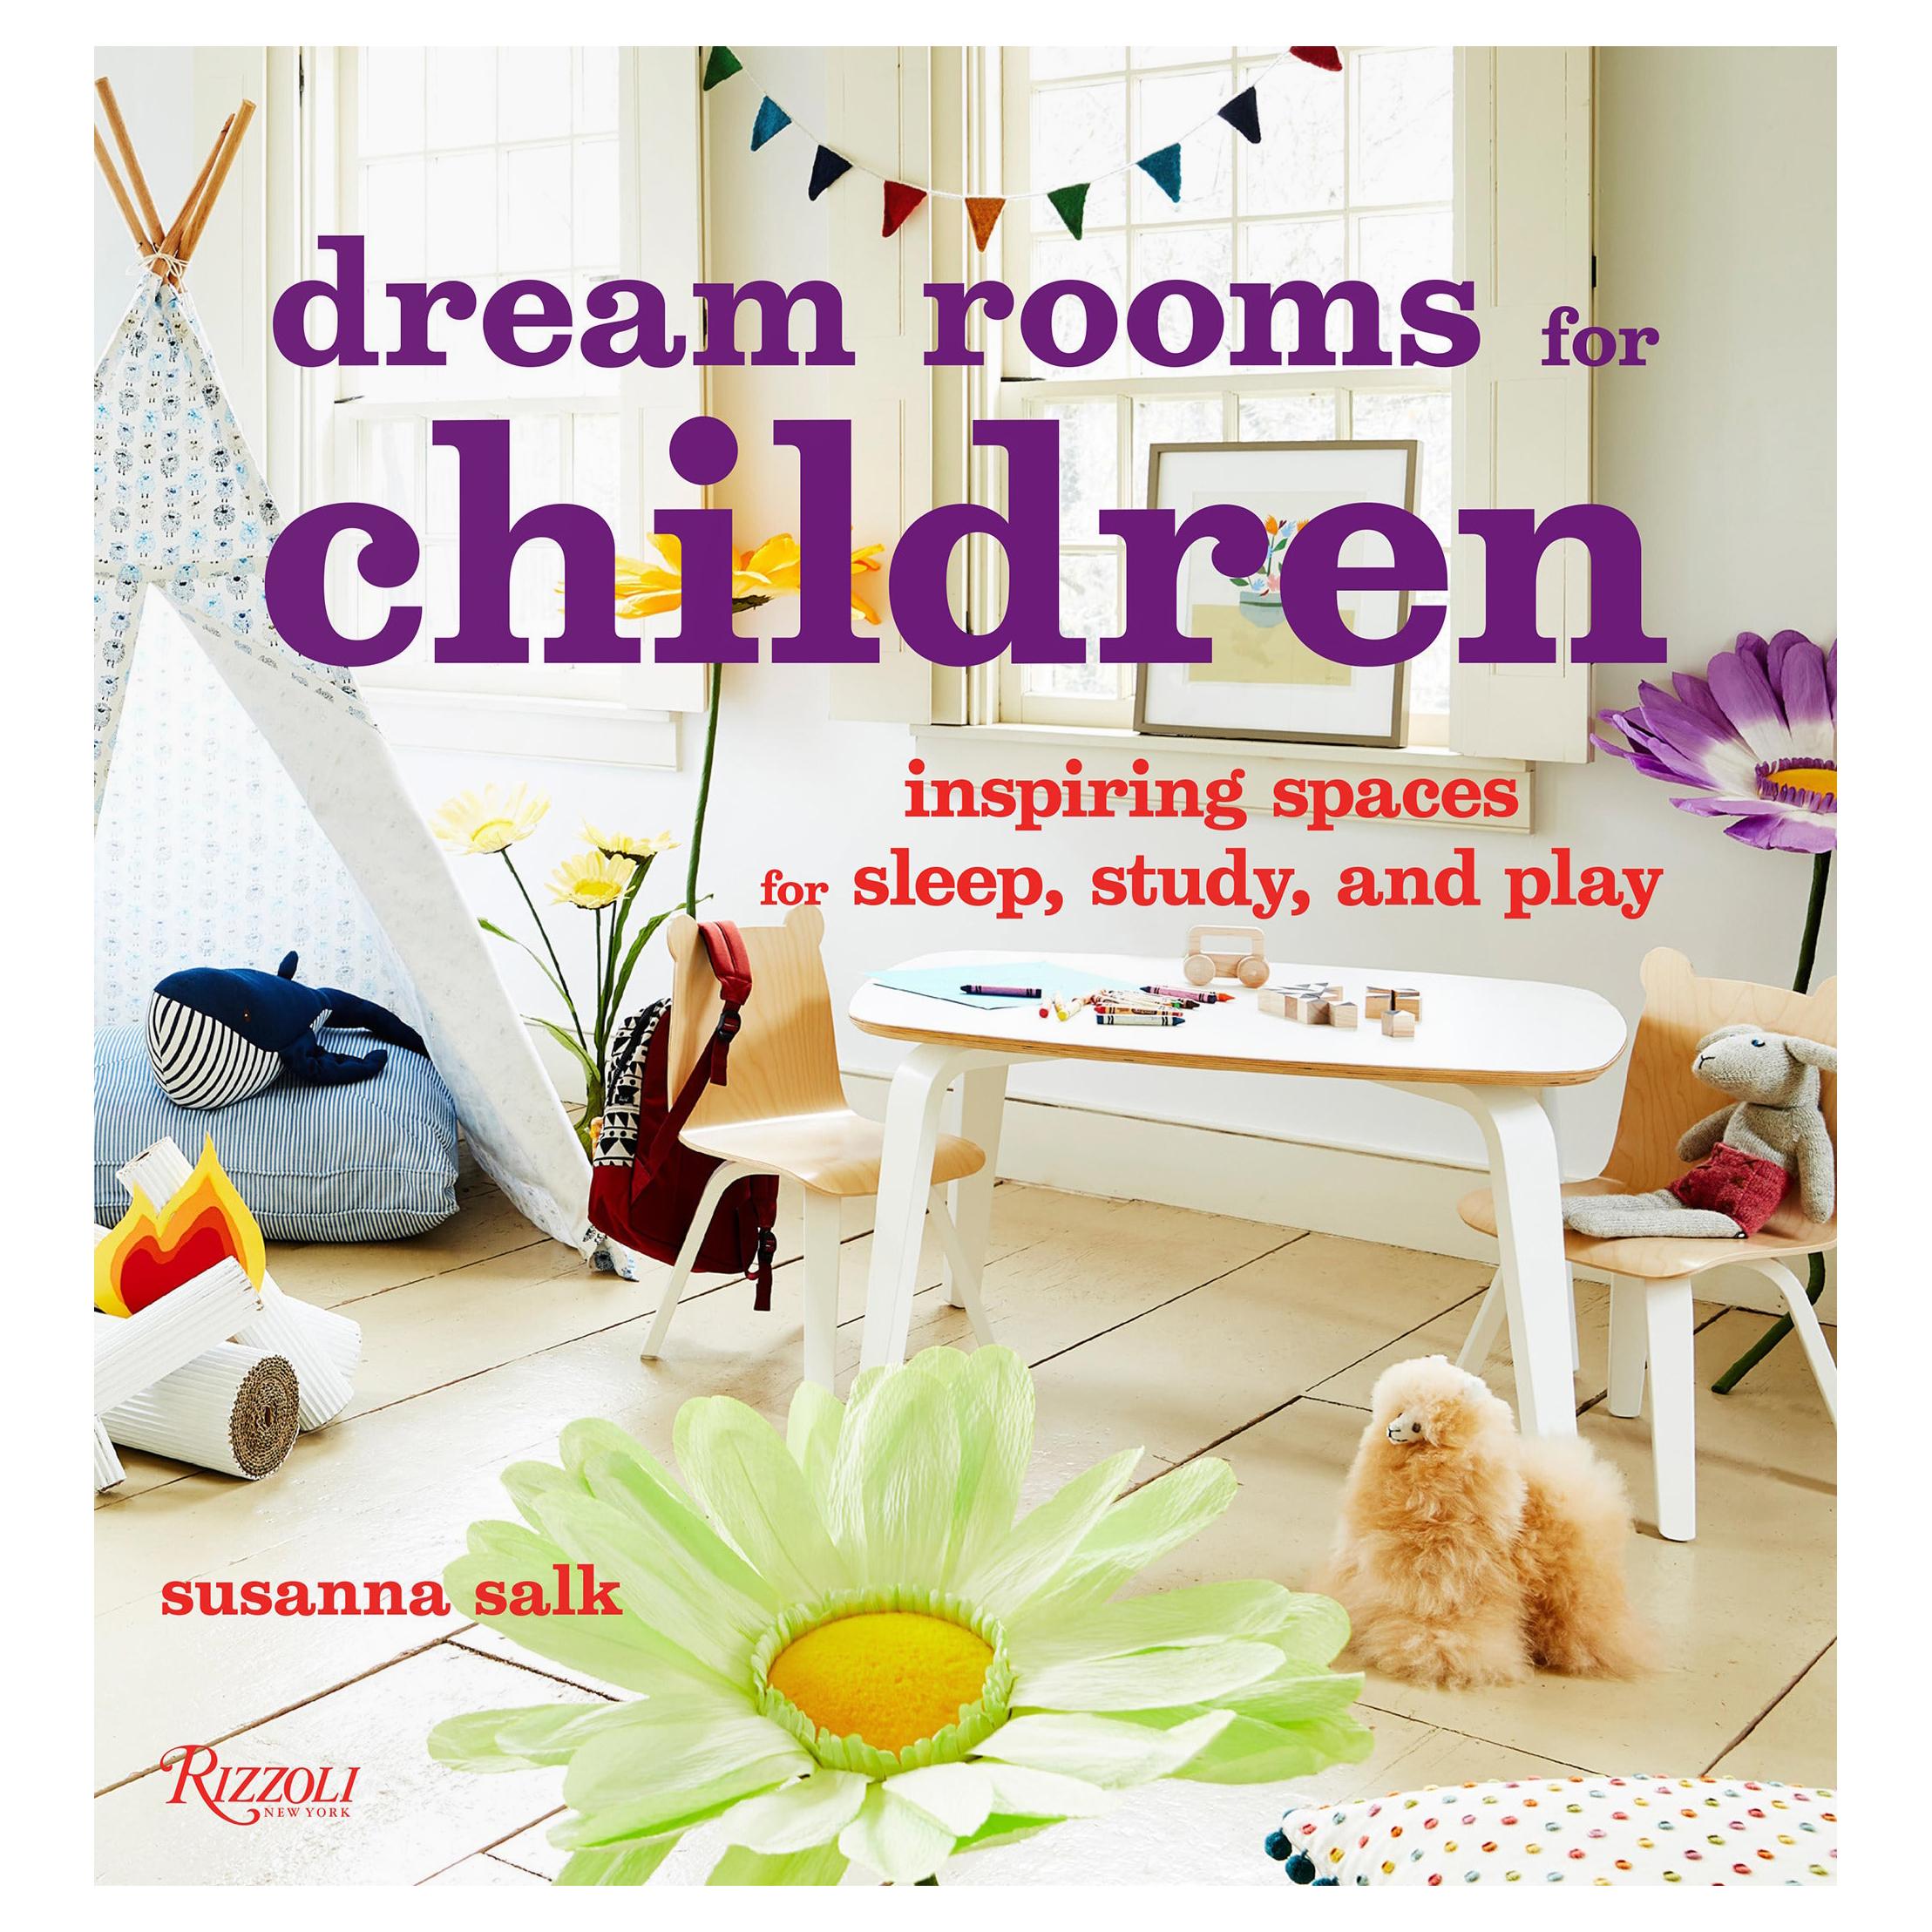 Dream Rooms for Children Inspiring Spaces for Sleep, Study, and Play